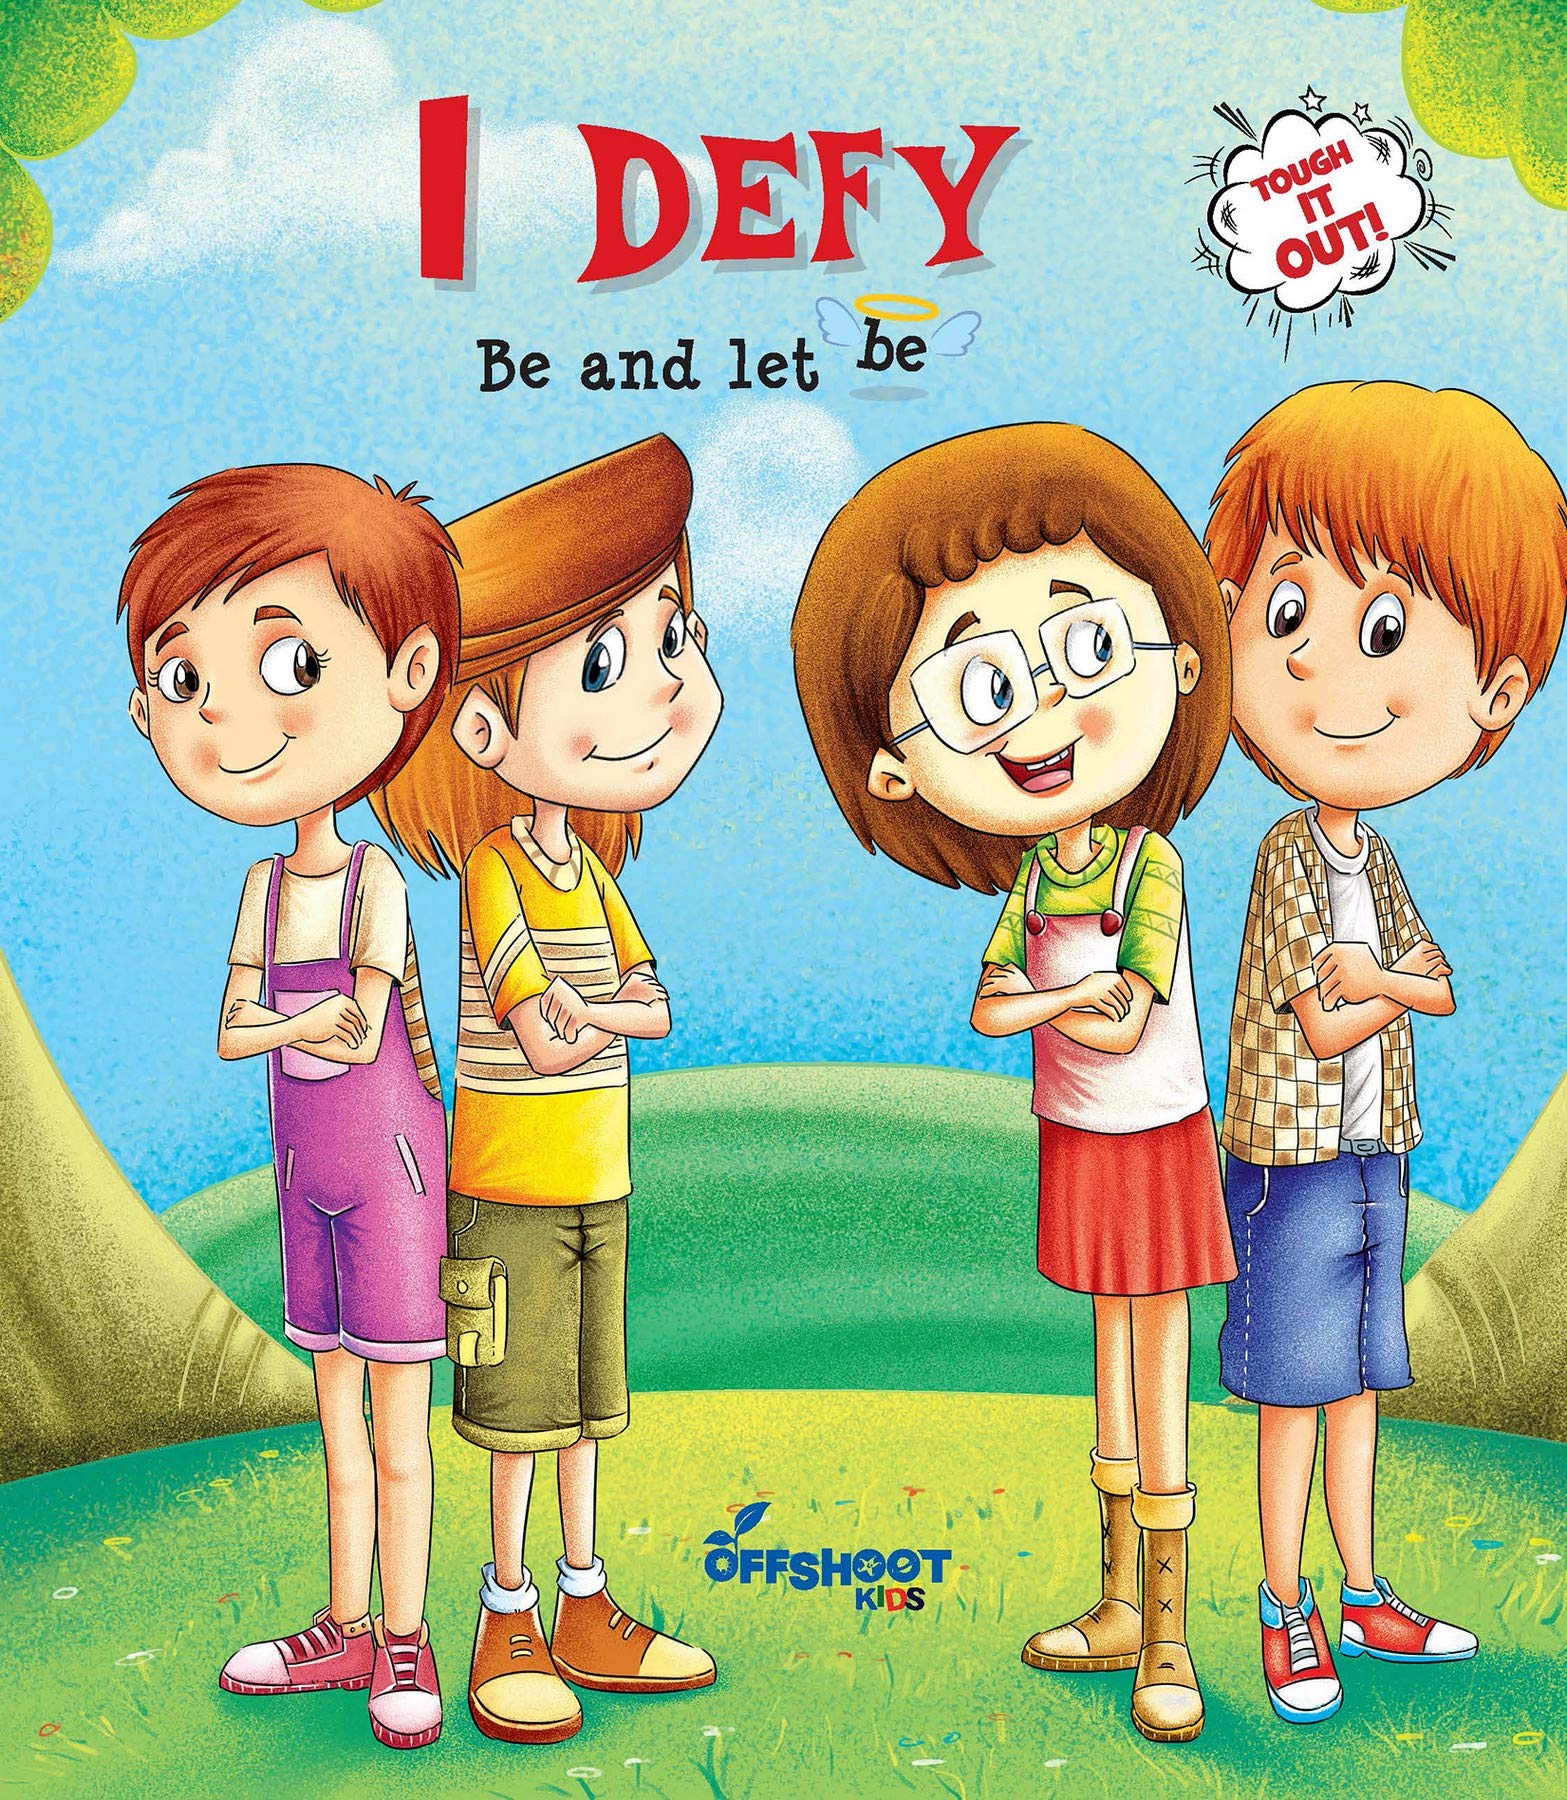 I Defy (Tough It Out!) : Best Worksheet & Activity Books For Kids Ages 8 to 11 Comic